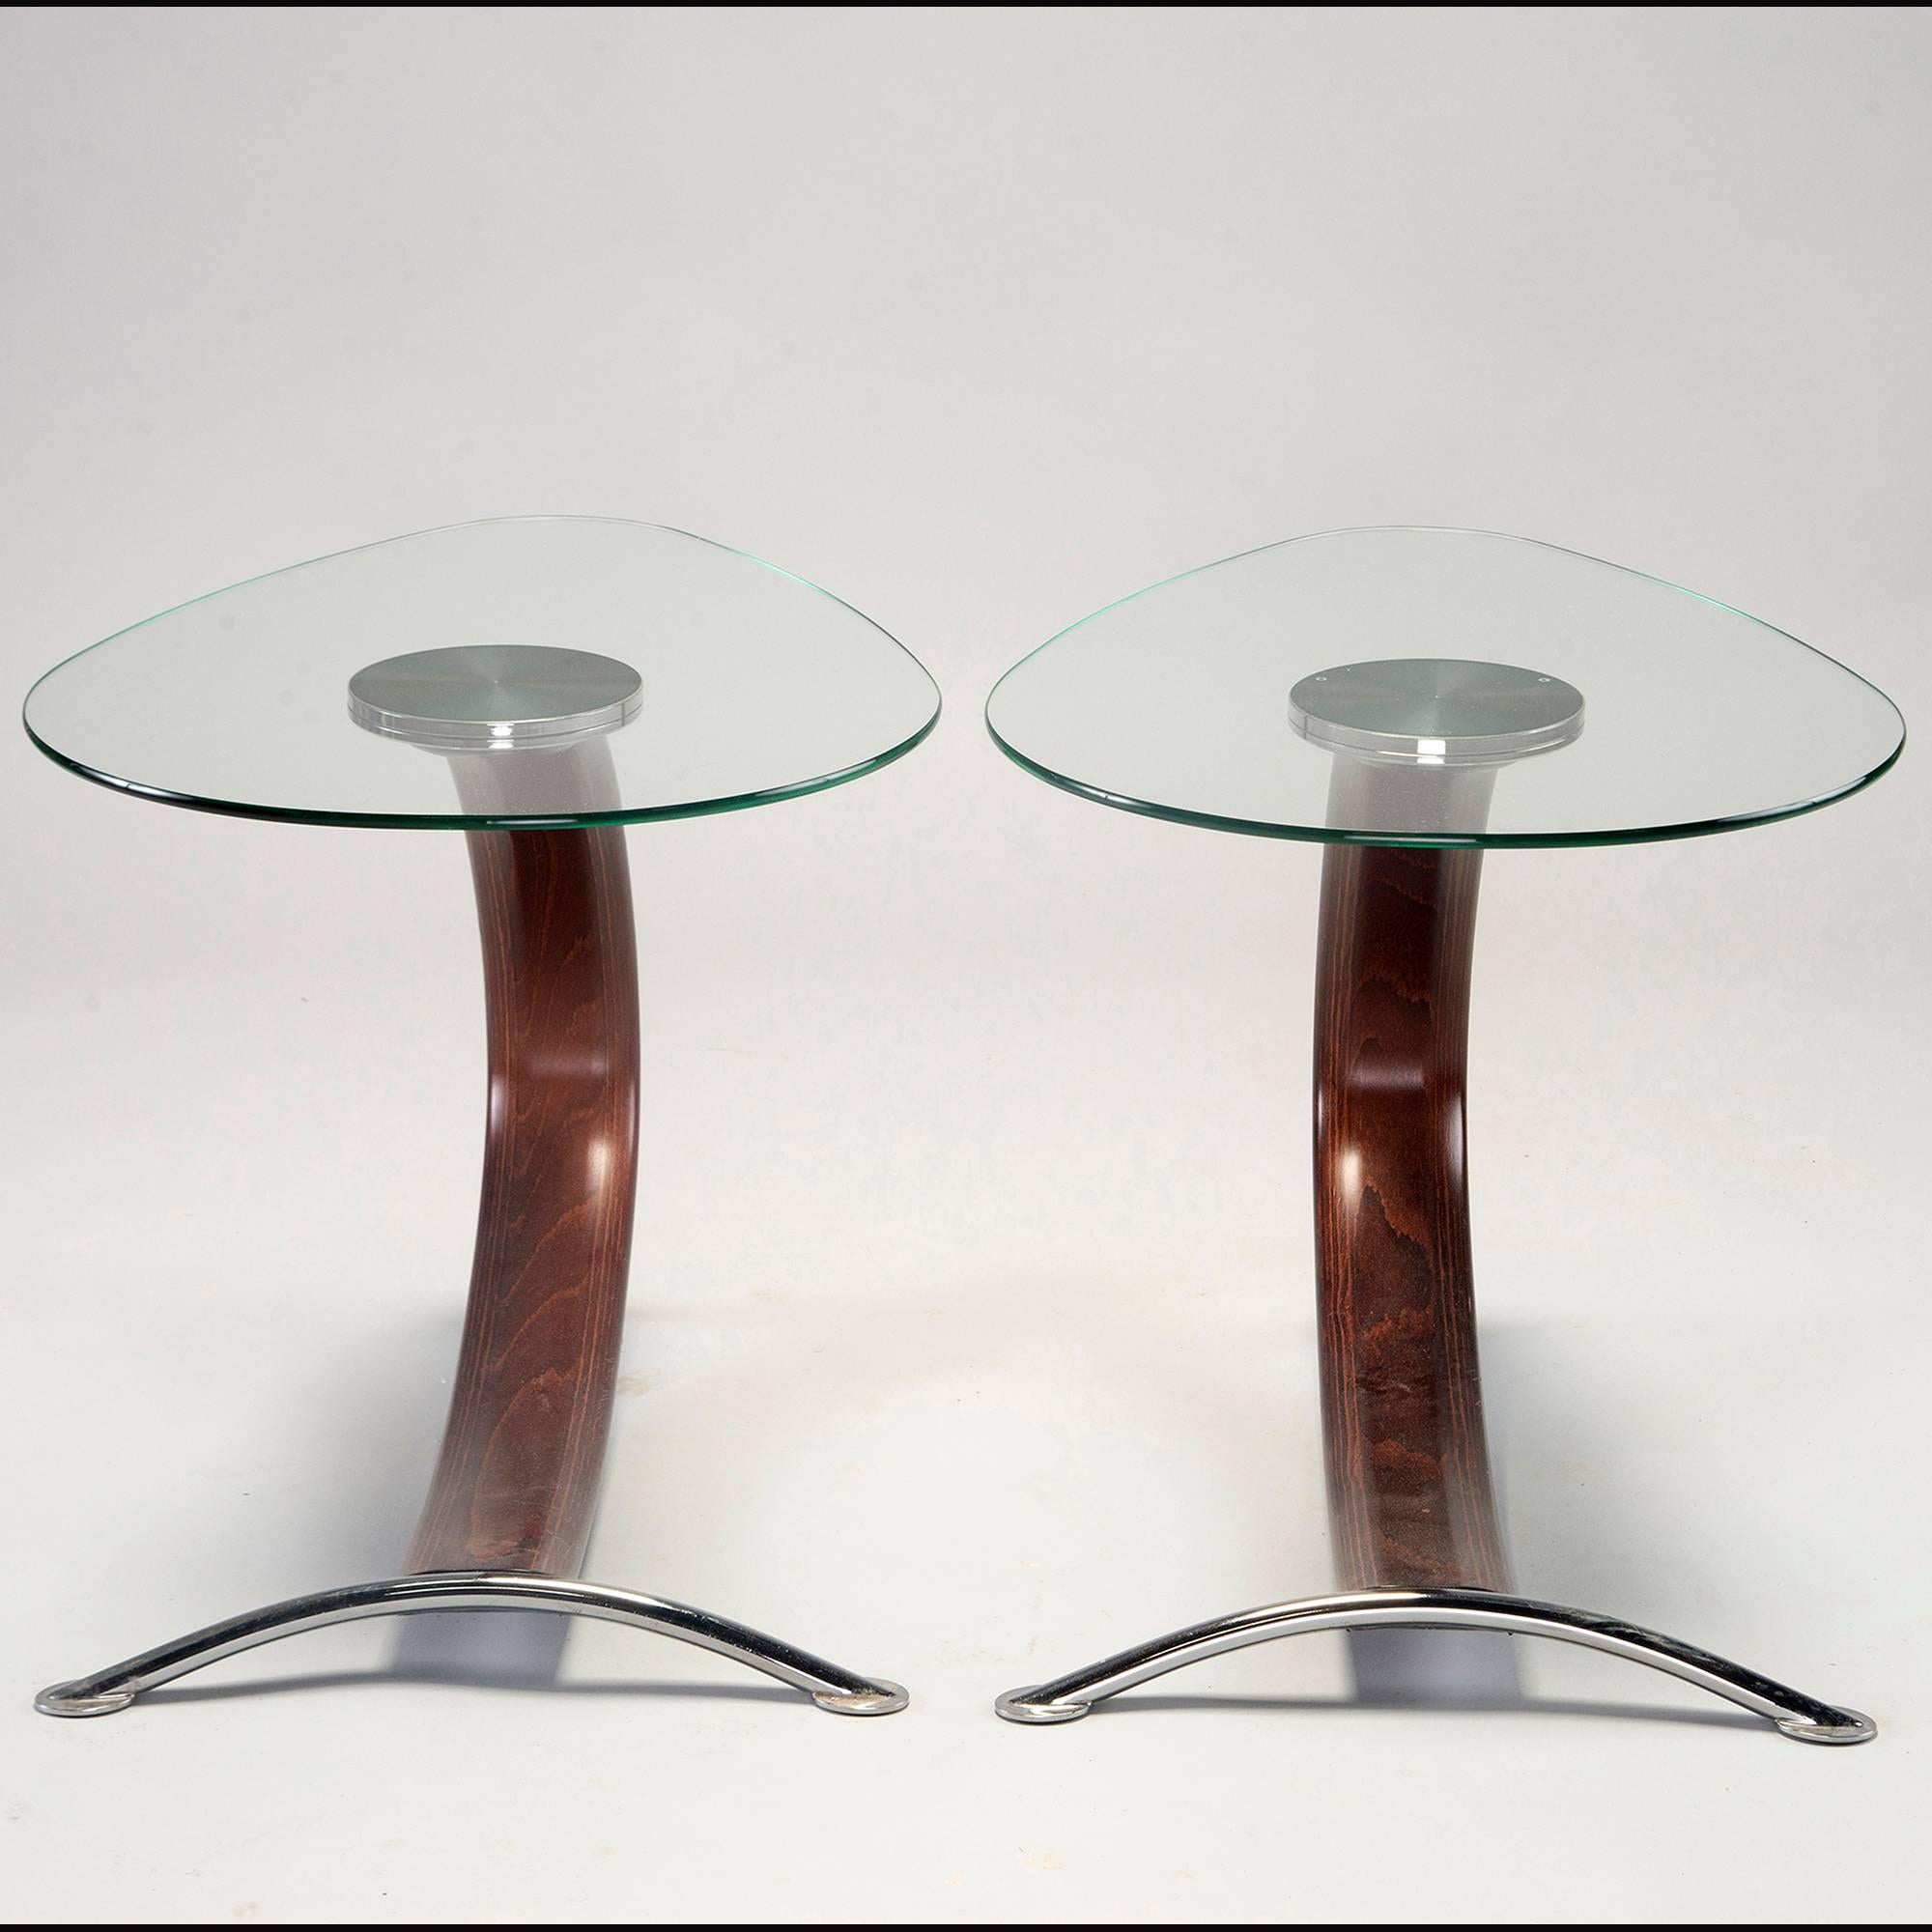 Pair of end tables found in Italy, circa 1970s. Tear drop shaped glass tops with chrome hardware and bentwood base. Wood is colored and figured like rosewood but the exact species and maker is unknown. Sold and priced as a pair.